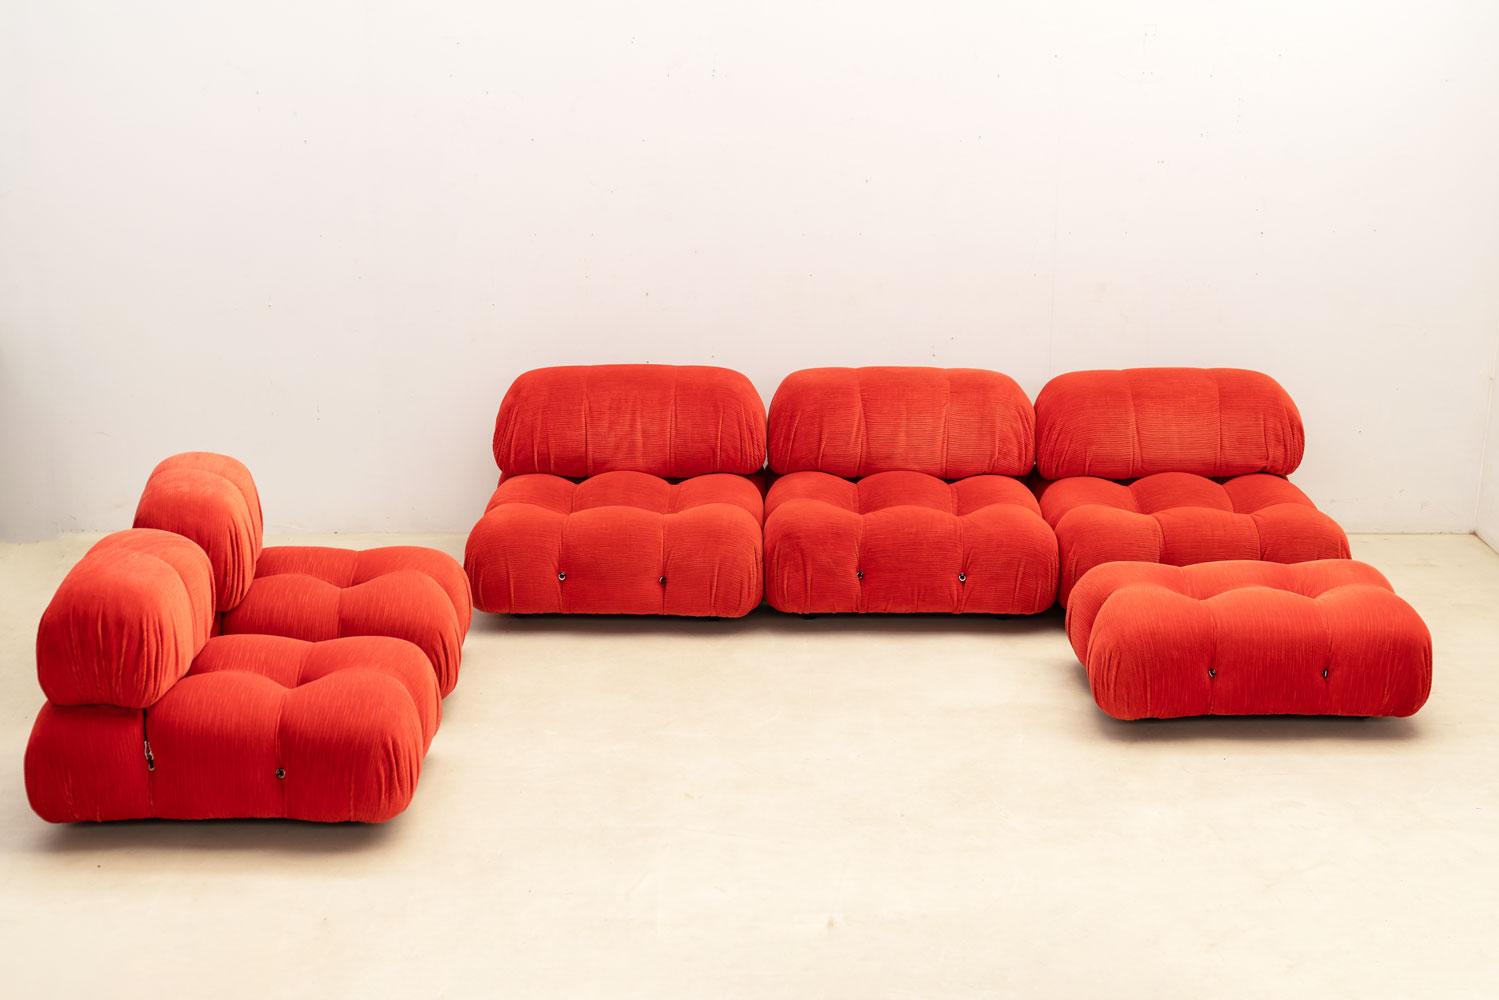 The Original Camaleonda modular sofa by Mario Bellini for B&B Italia is a renowned piece of furniture from the 1970s. 
It comprises three large and two smaller seating elements with backrests, along with one ottoman, all upholstered in the original